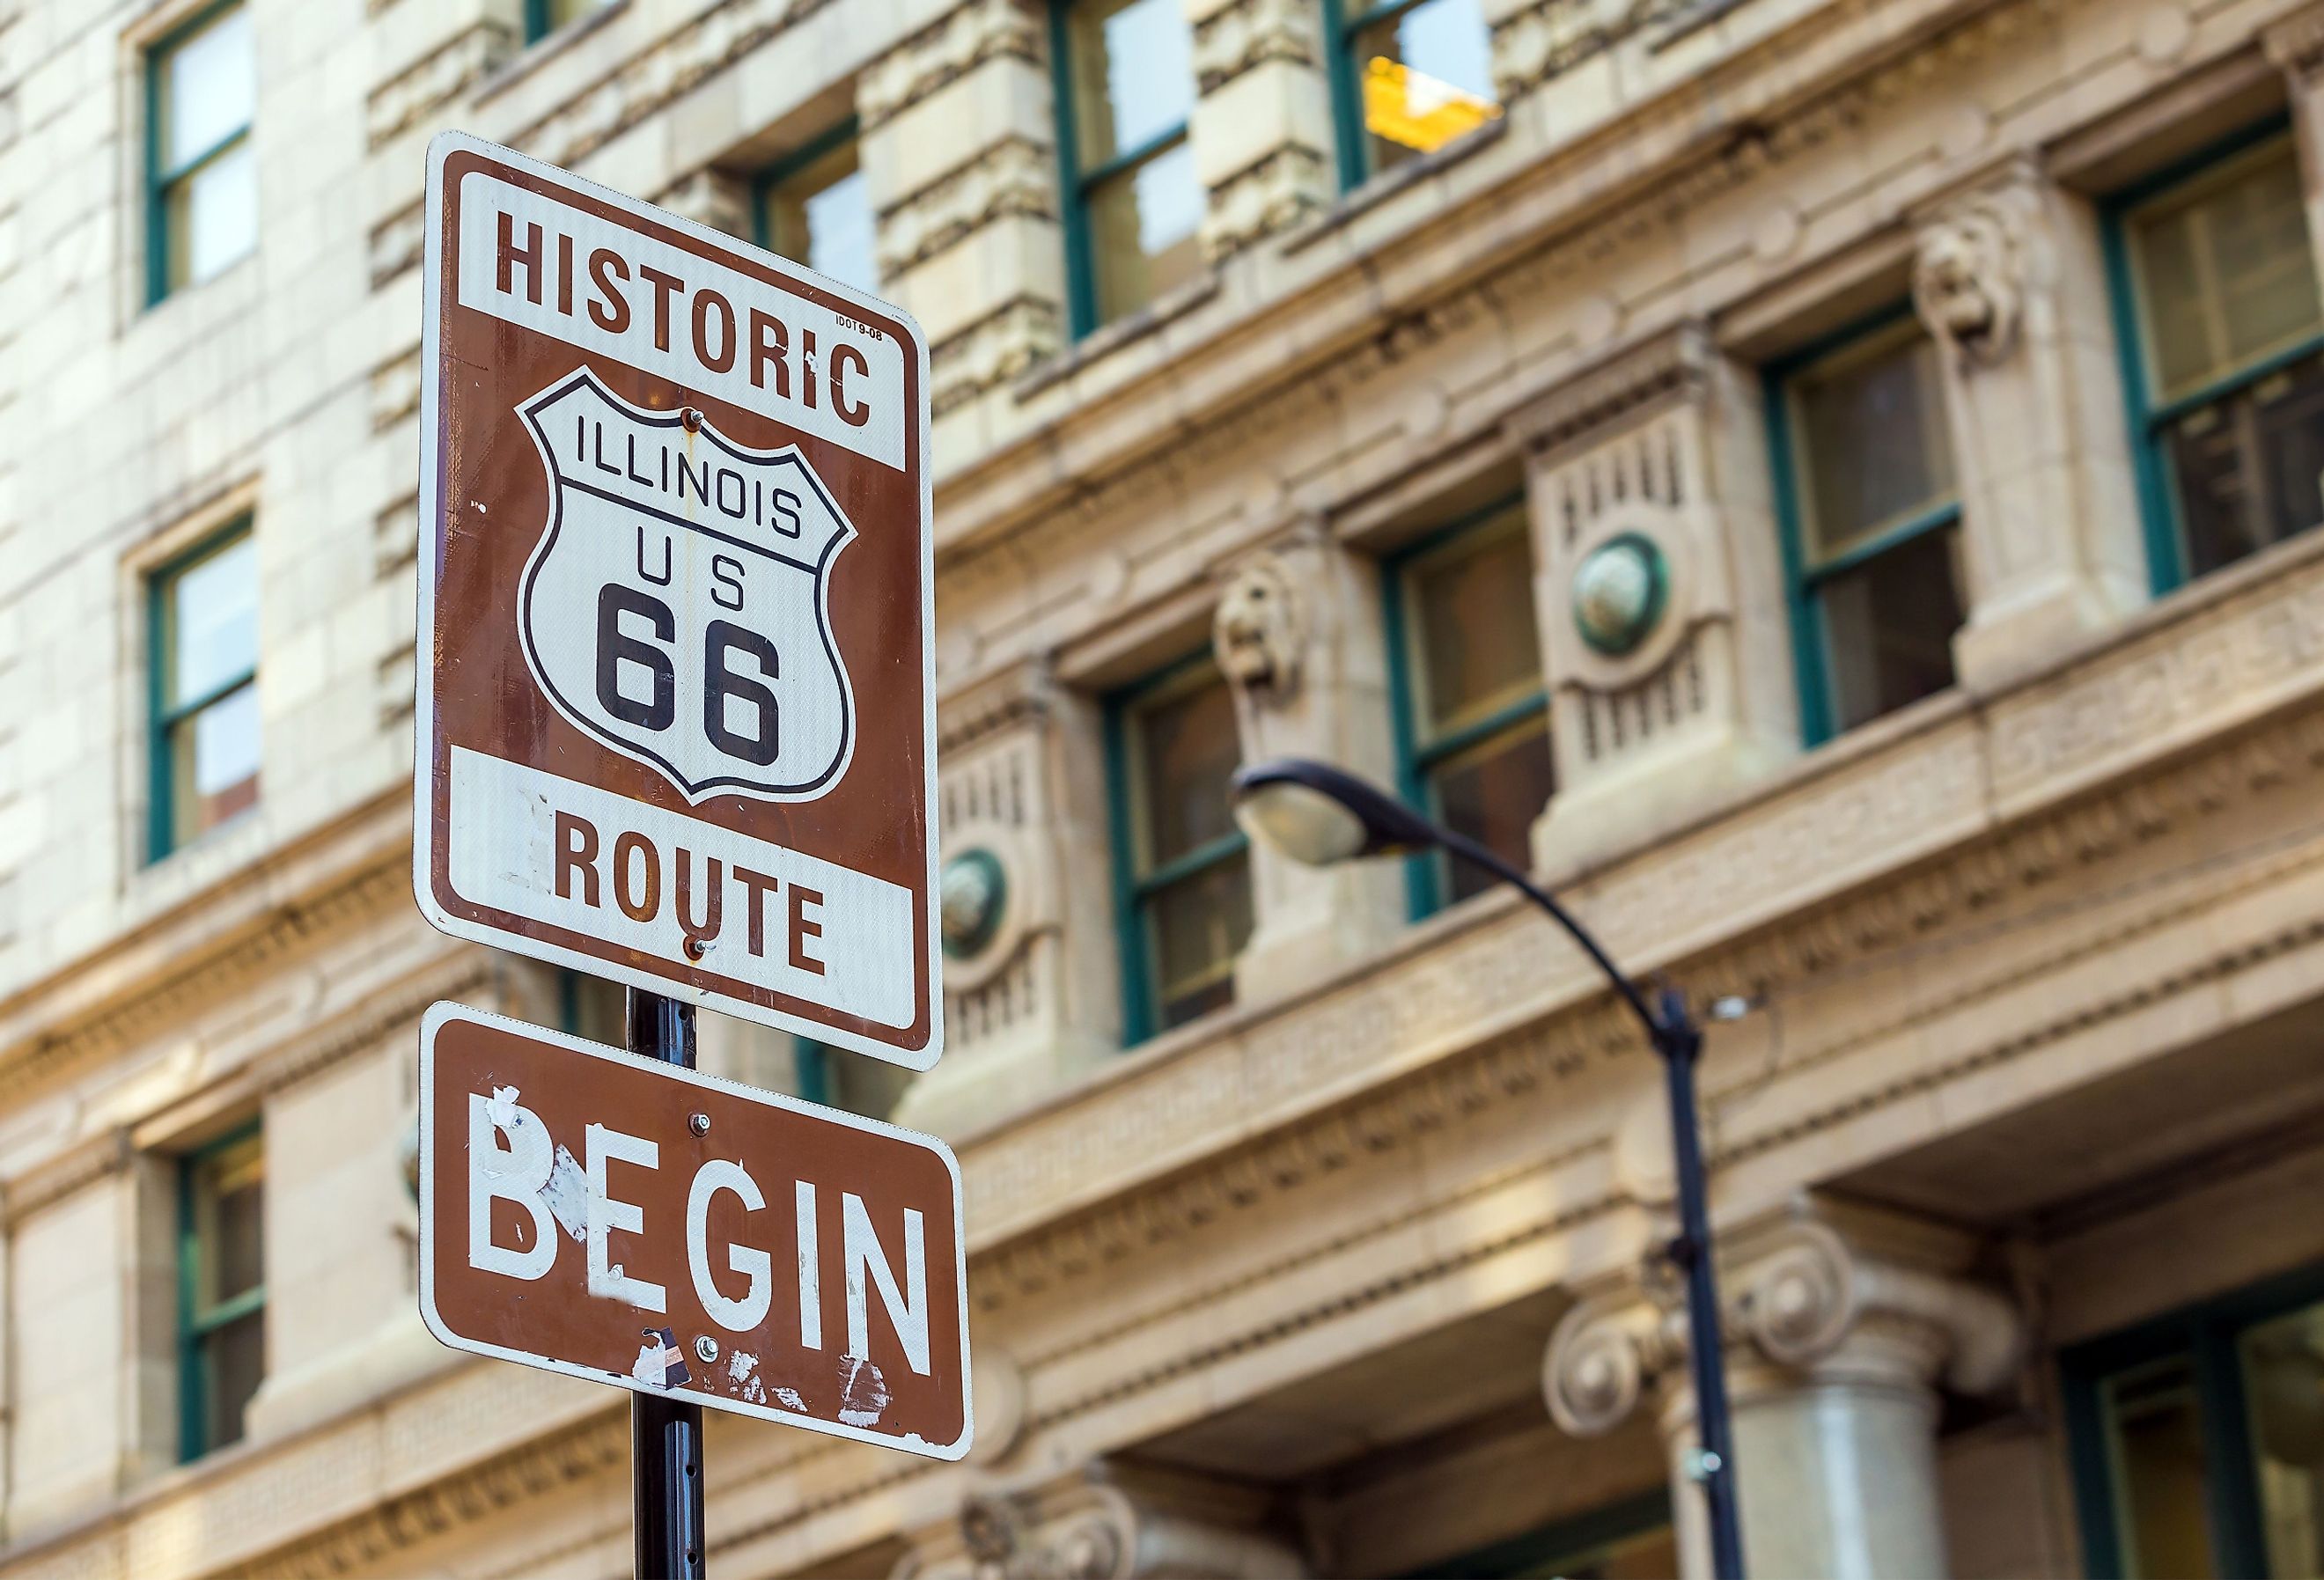 Route 66 sign, the beginning of historic Route 66, leading through Chicago, Illinois. Image credit f11photo via Shutterstock.